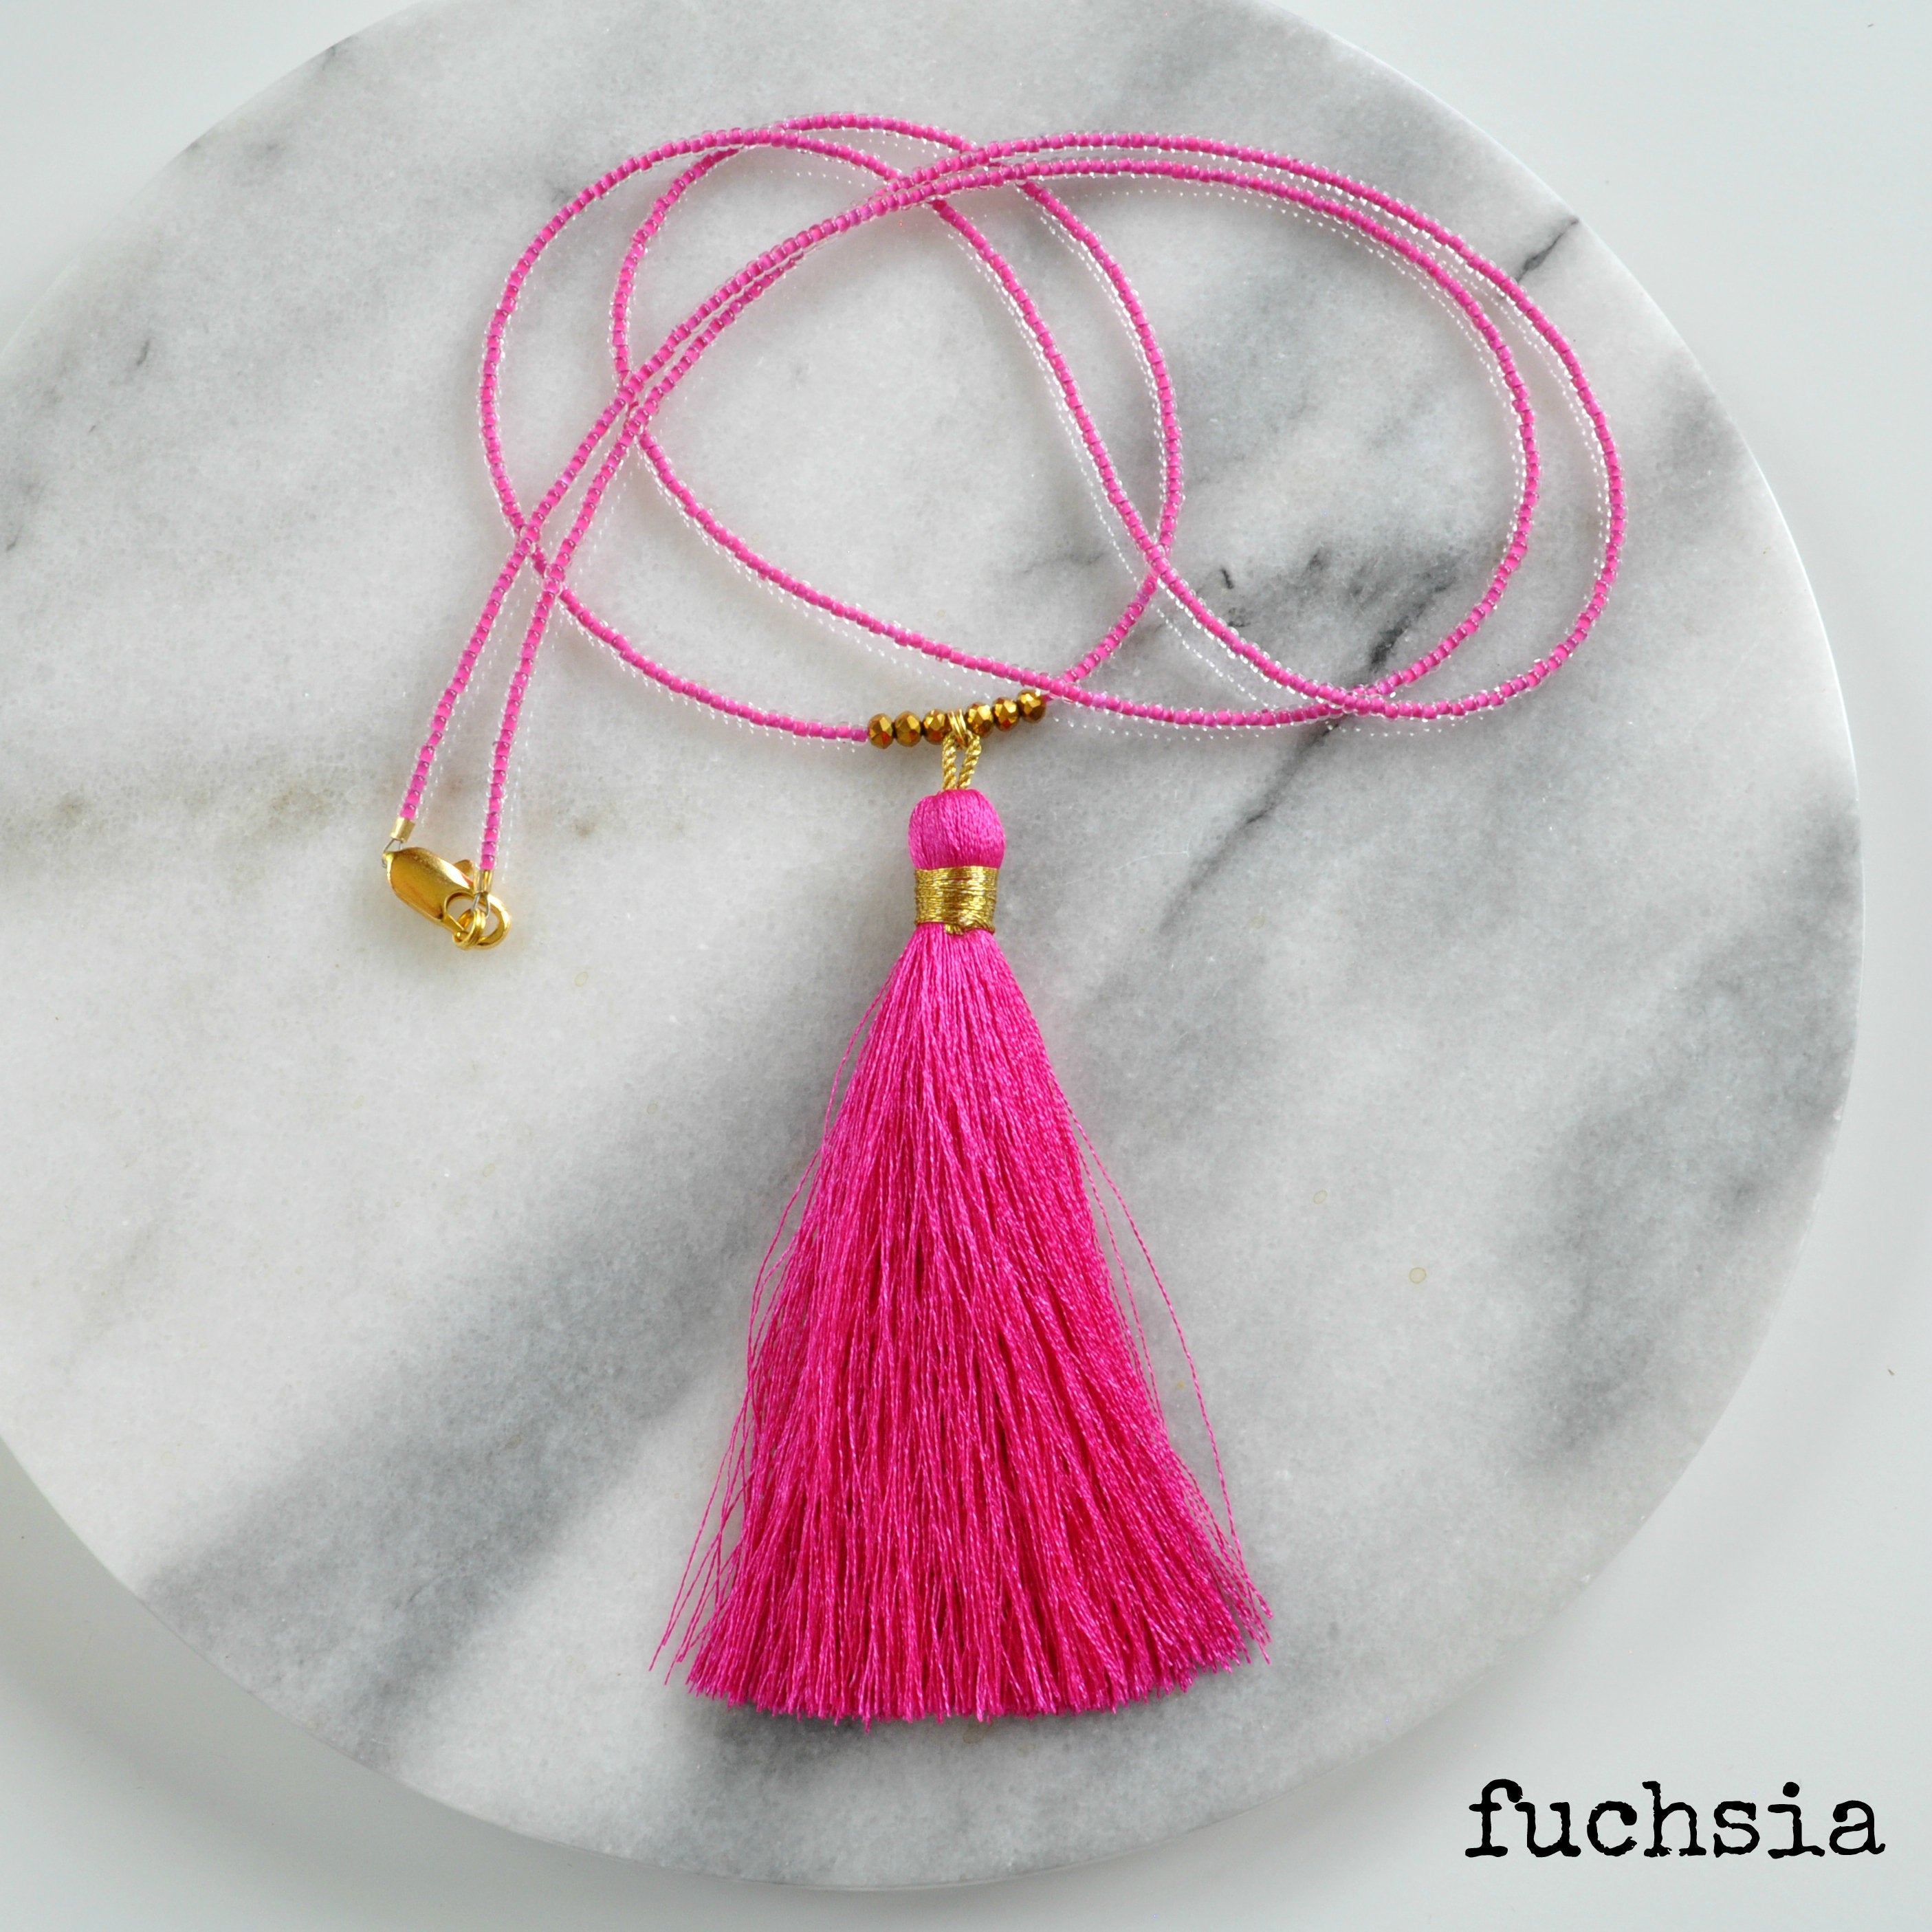 Libby & Smee Beaded Tassel Necklace in  Fuchsia, still life labeled